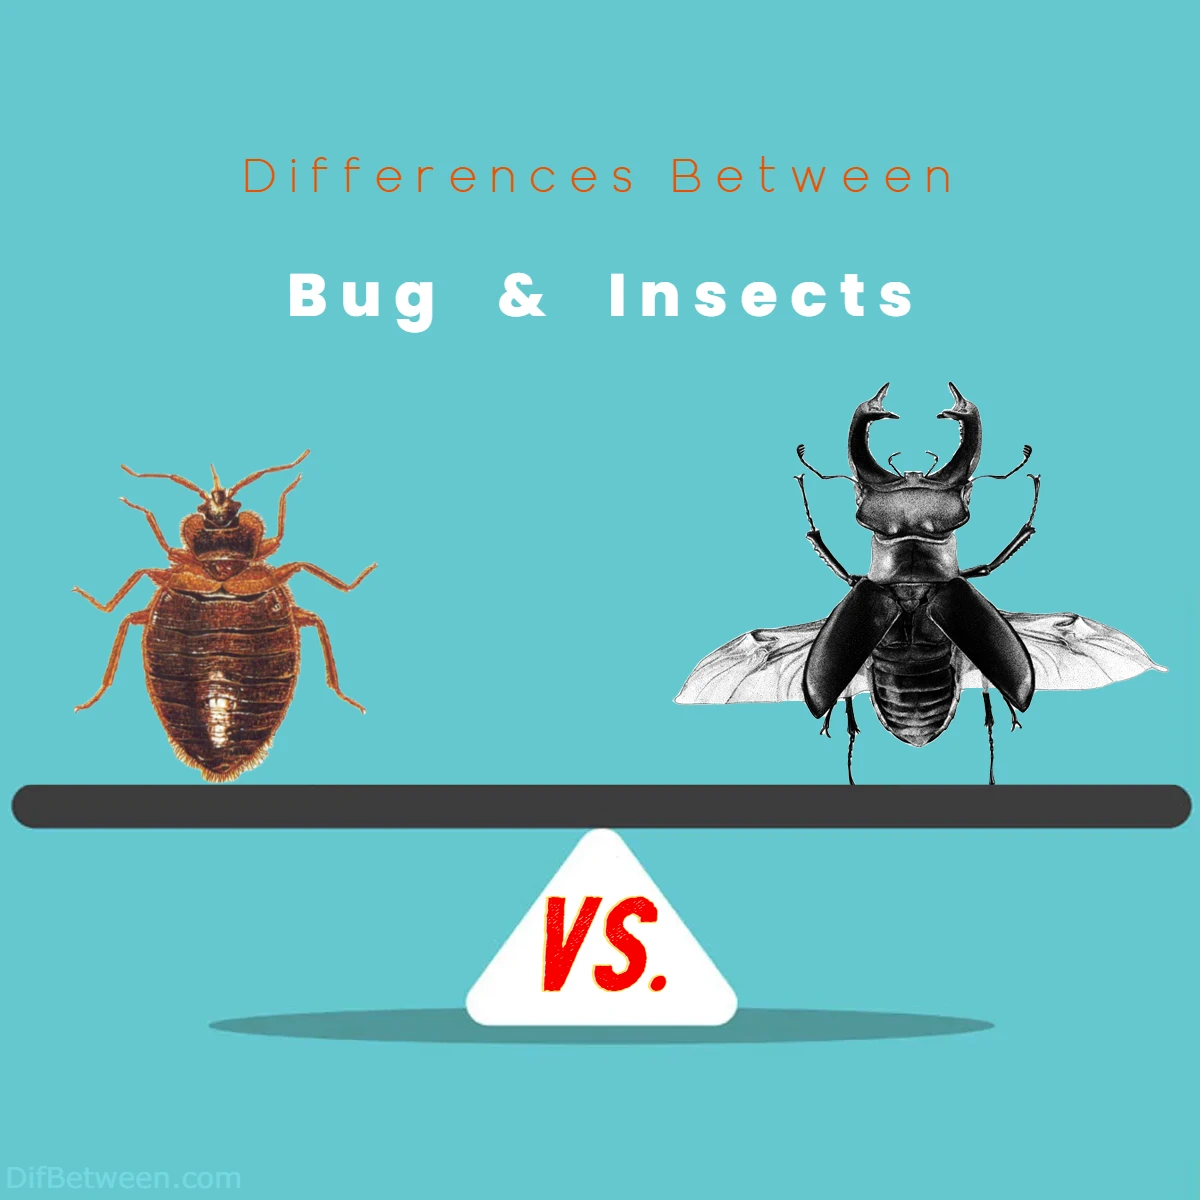 Differences Between Bug vs Insects